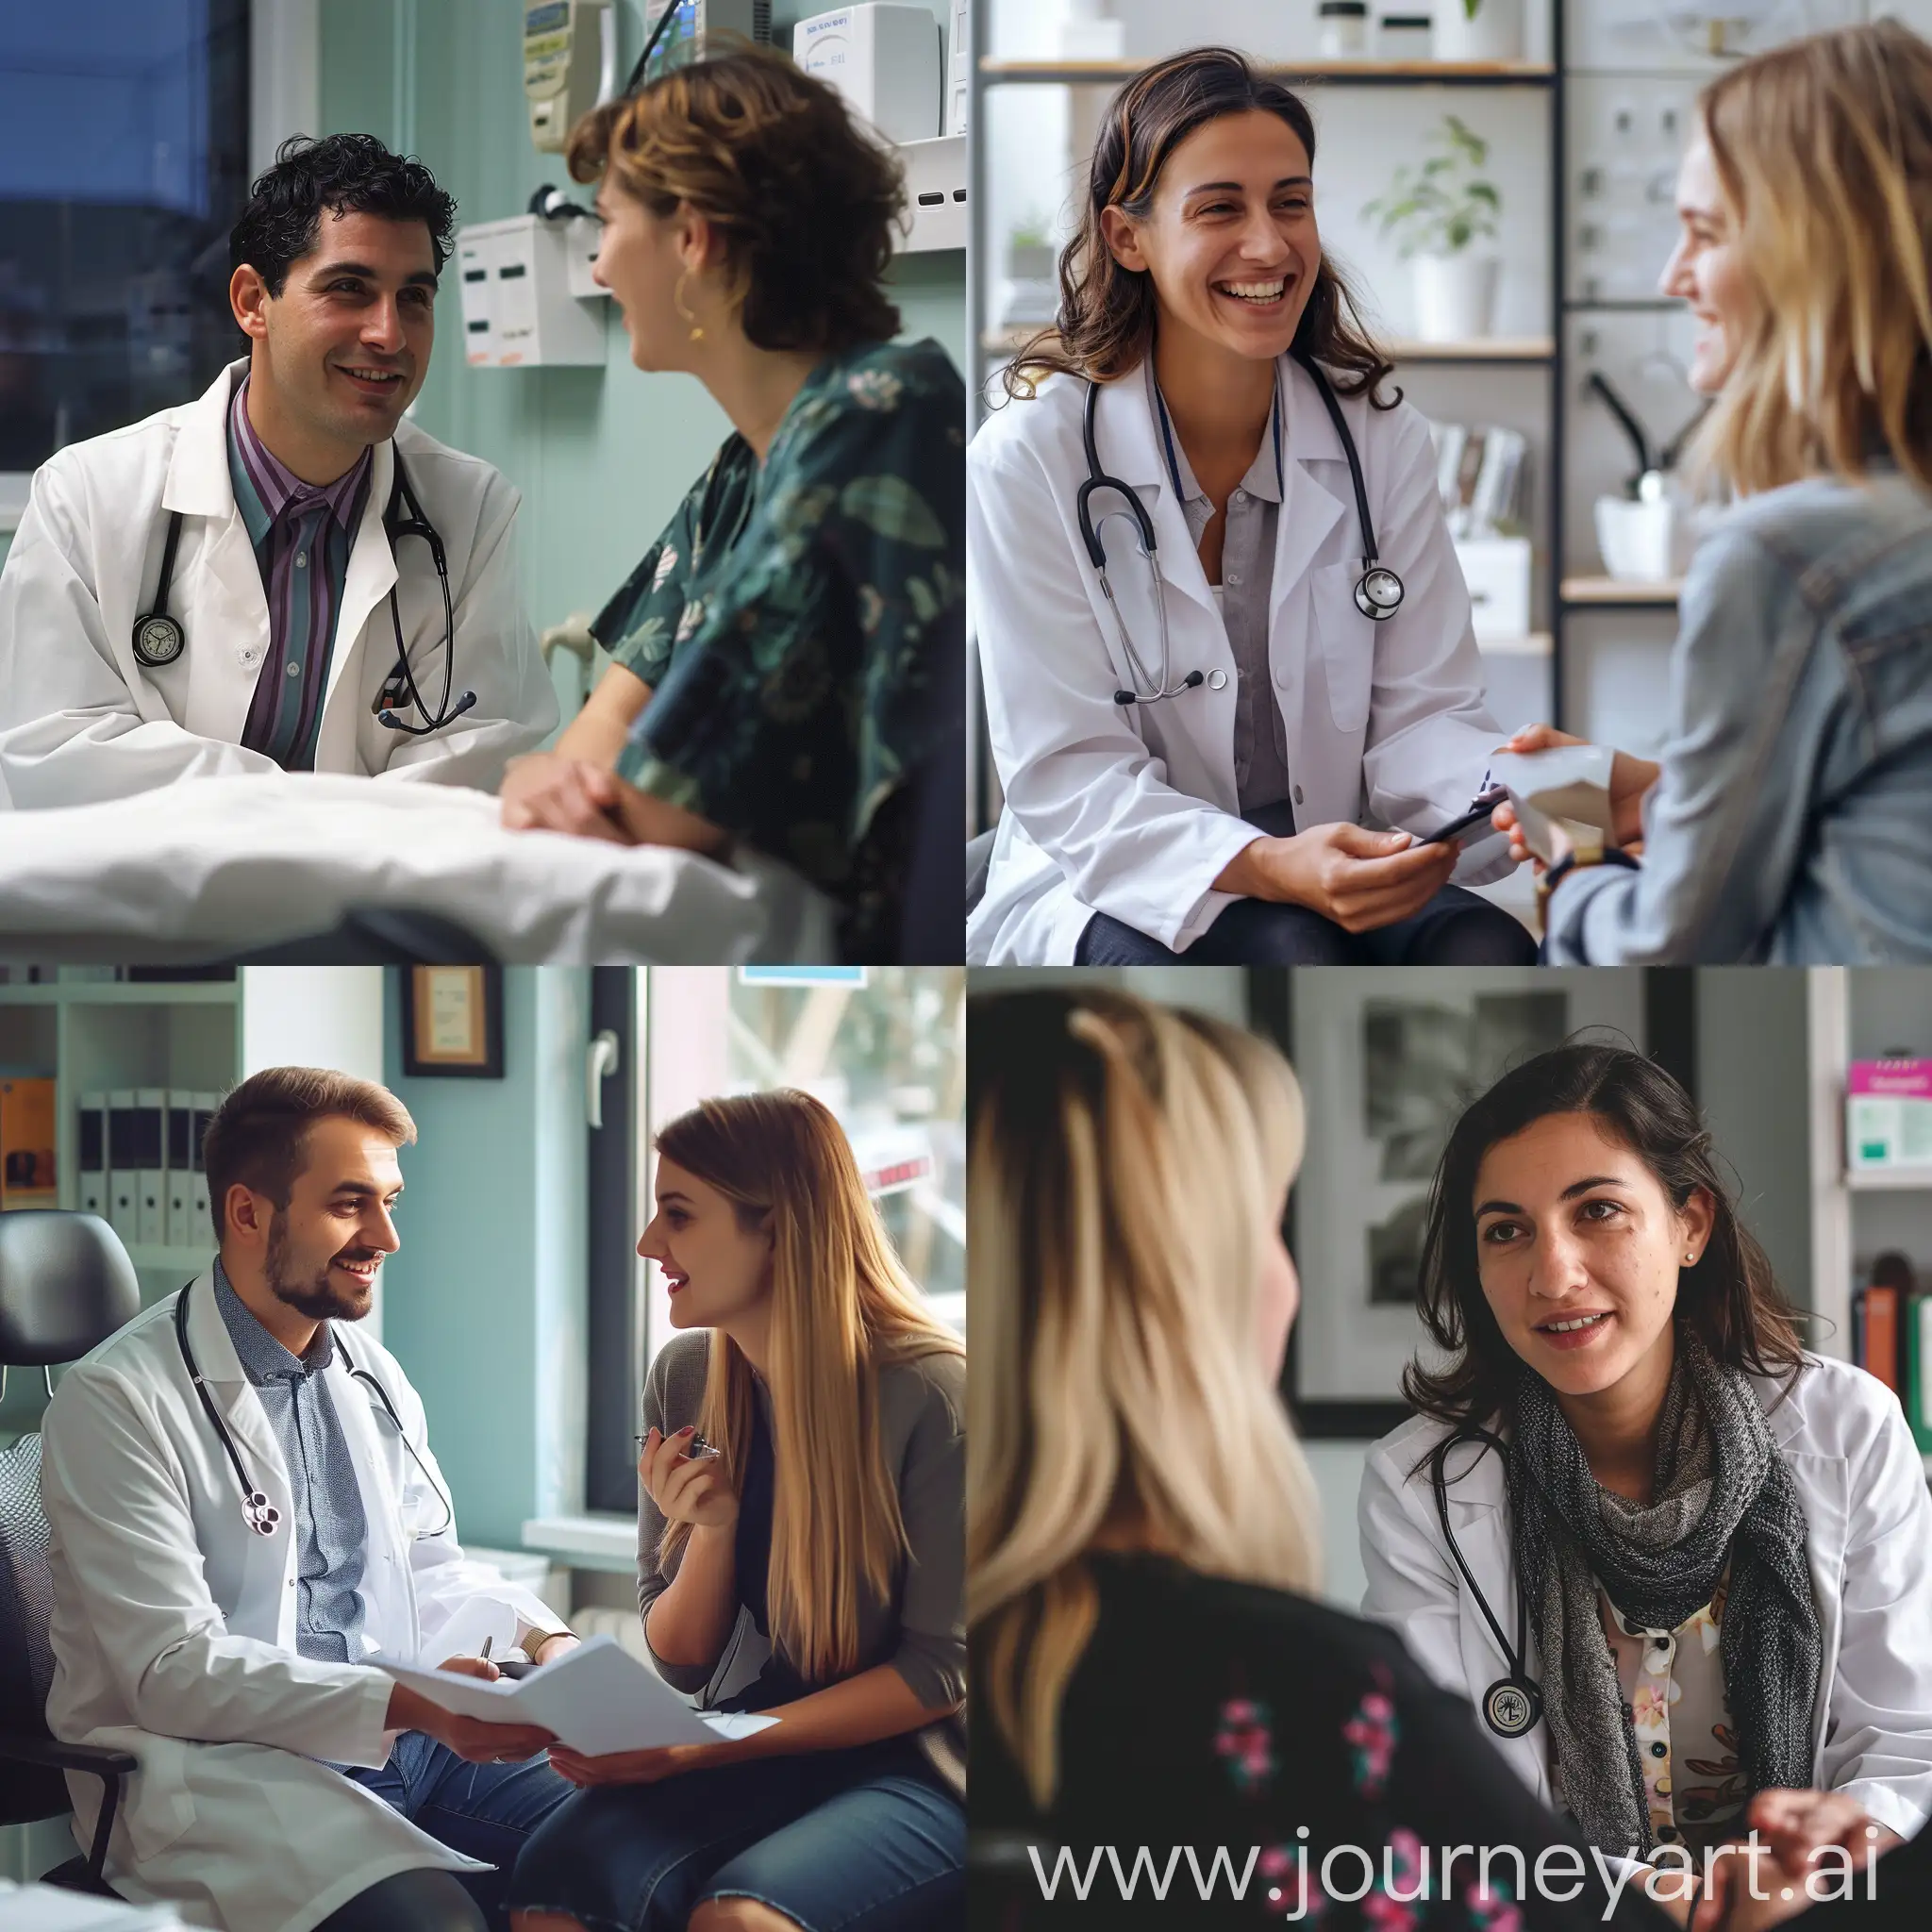 an image representing the learning of English on communication with a patient